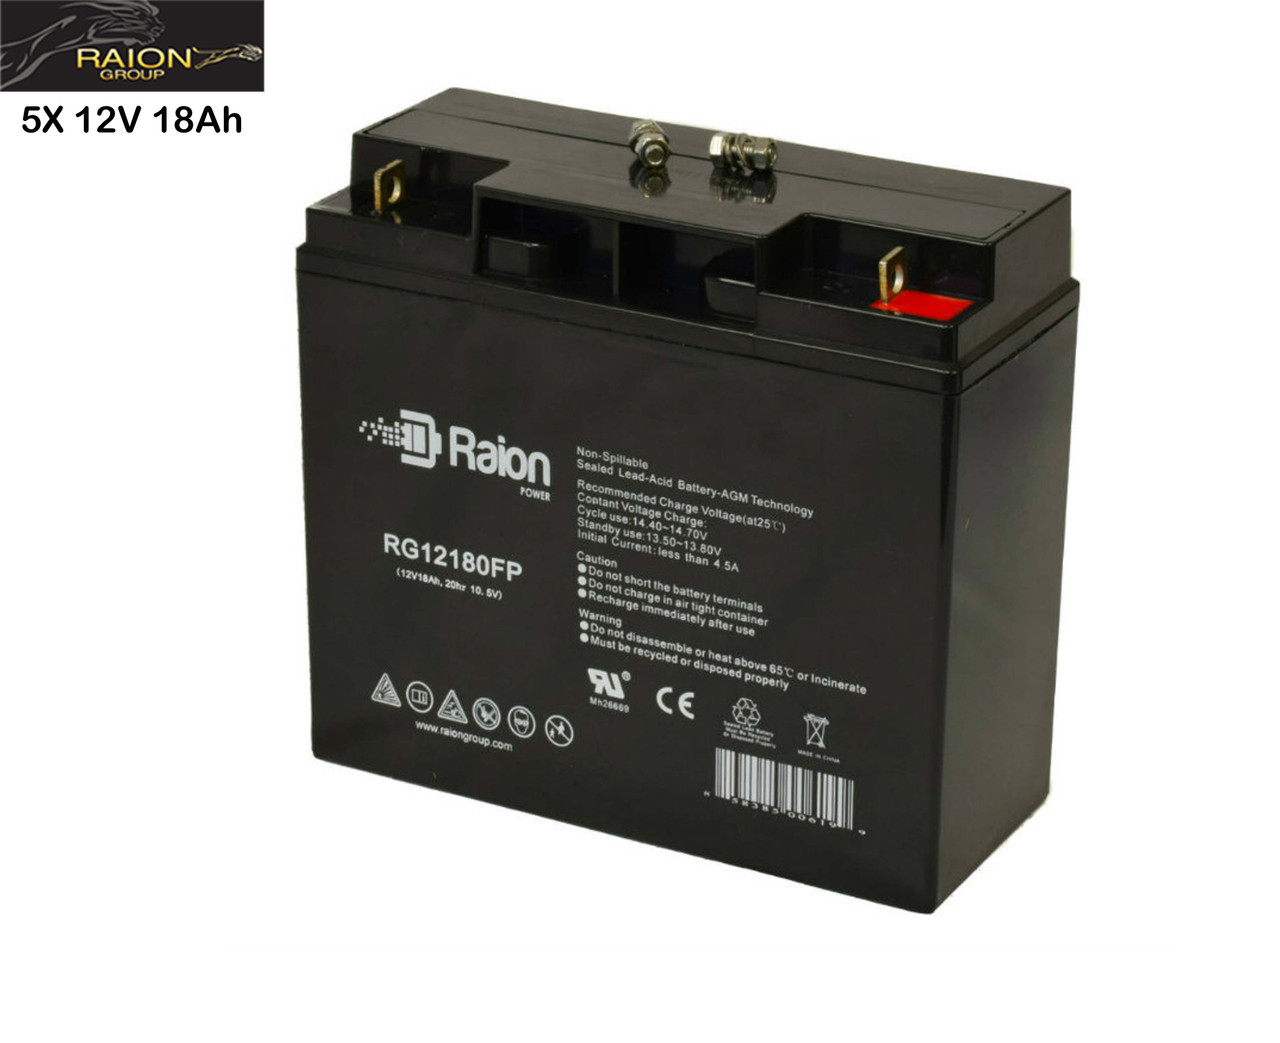 Raion Power Replacement 12V 18Ah Battery for KGEEZ Cycle VROOM 500 - 5 Pack